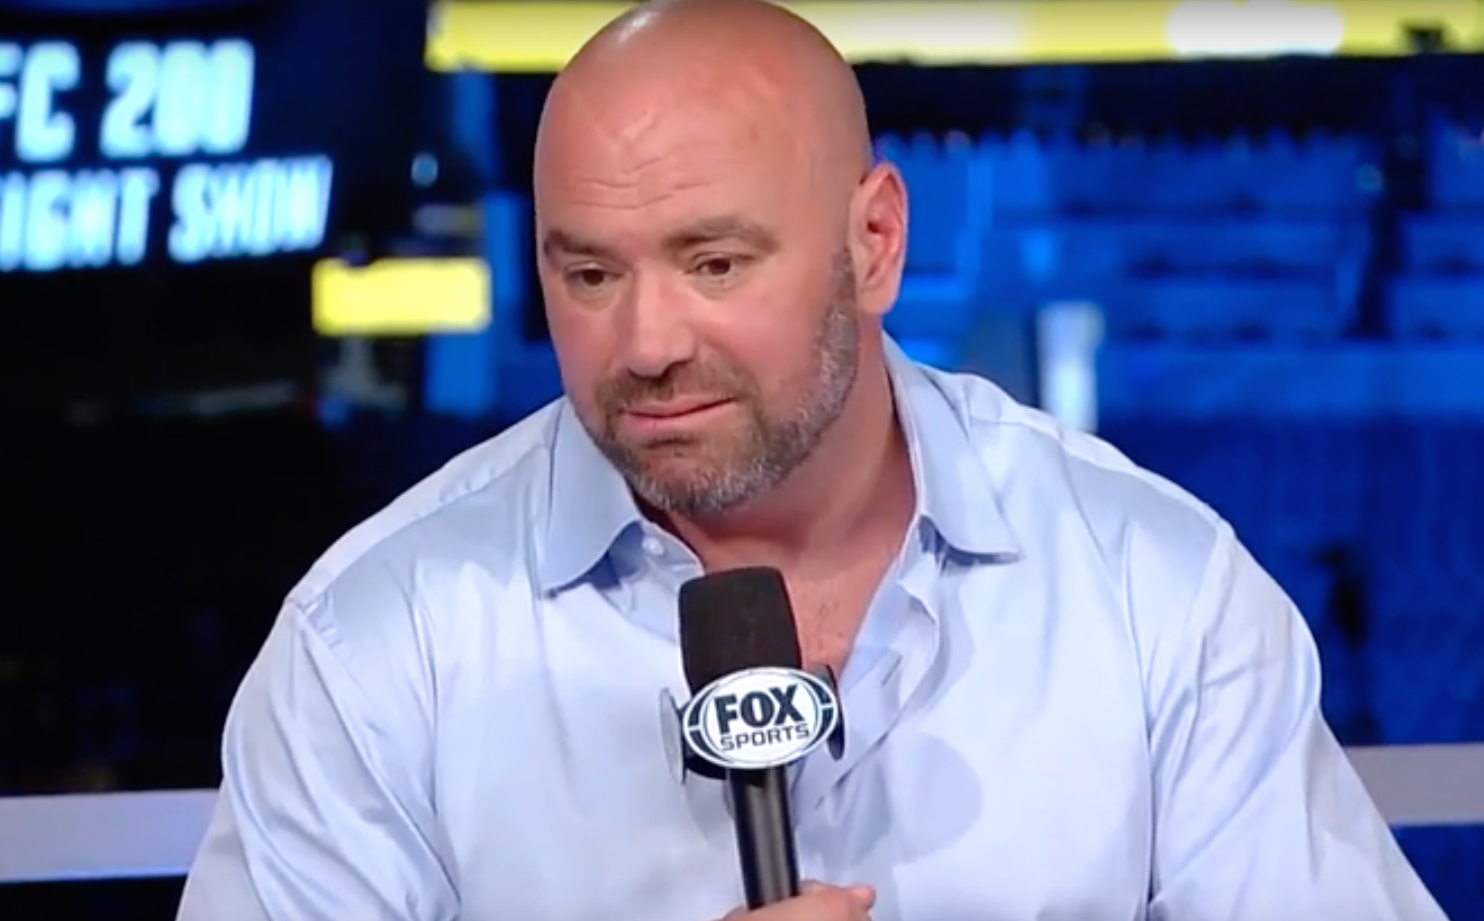 How much is Dana White from UFC worth?